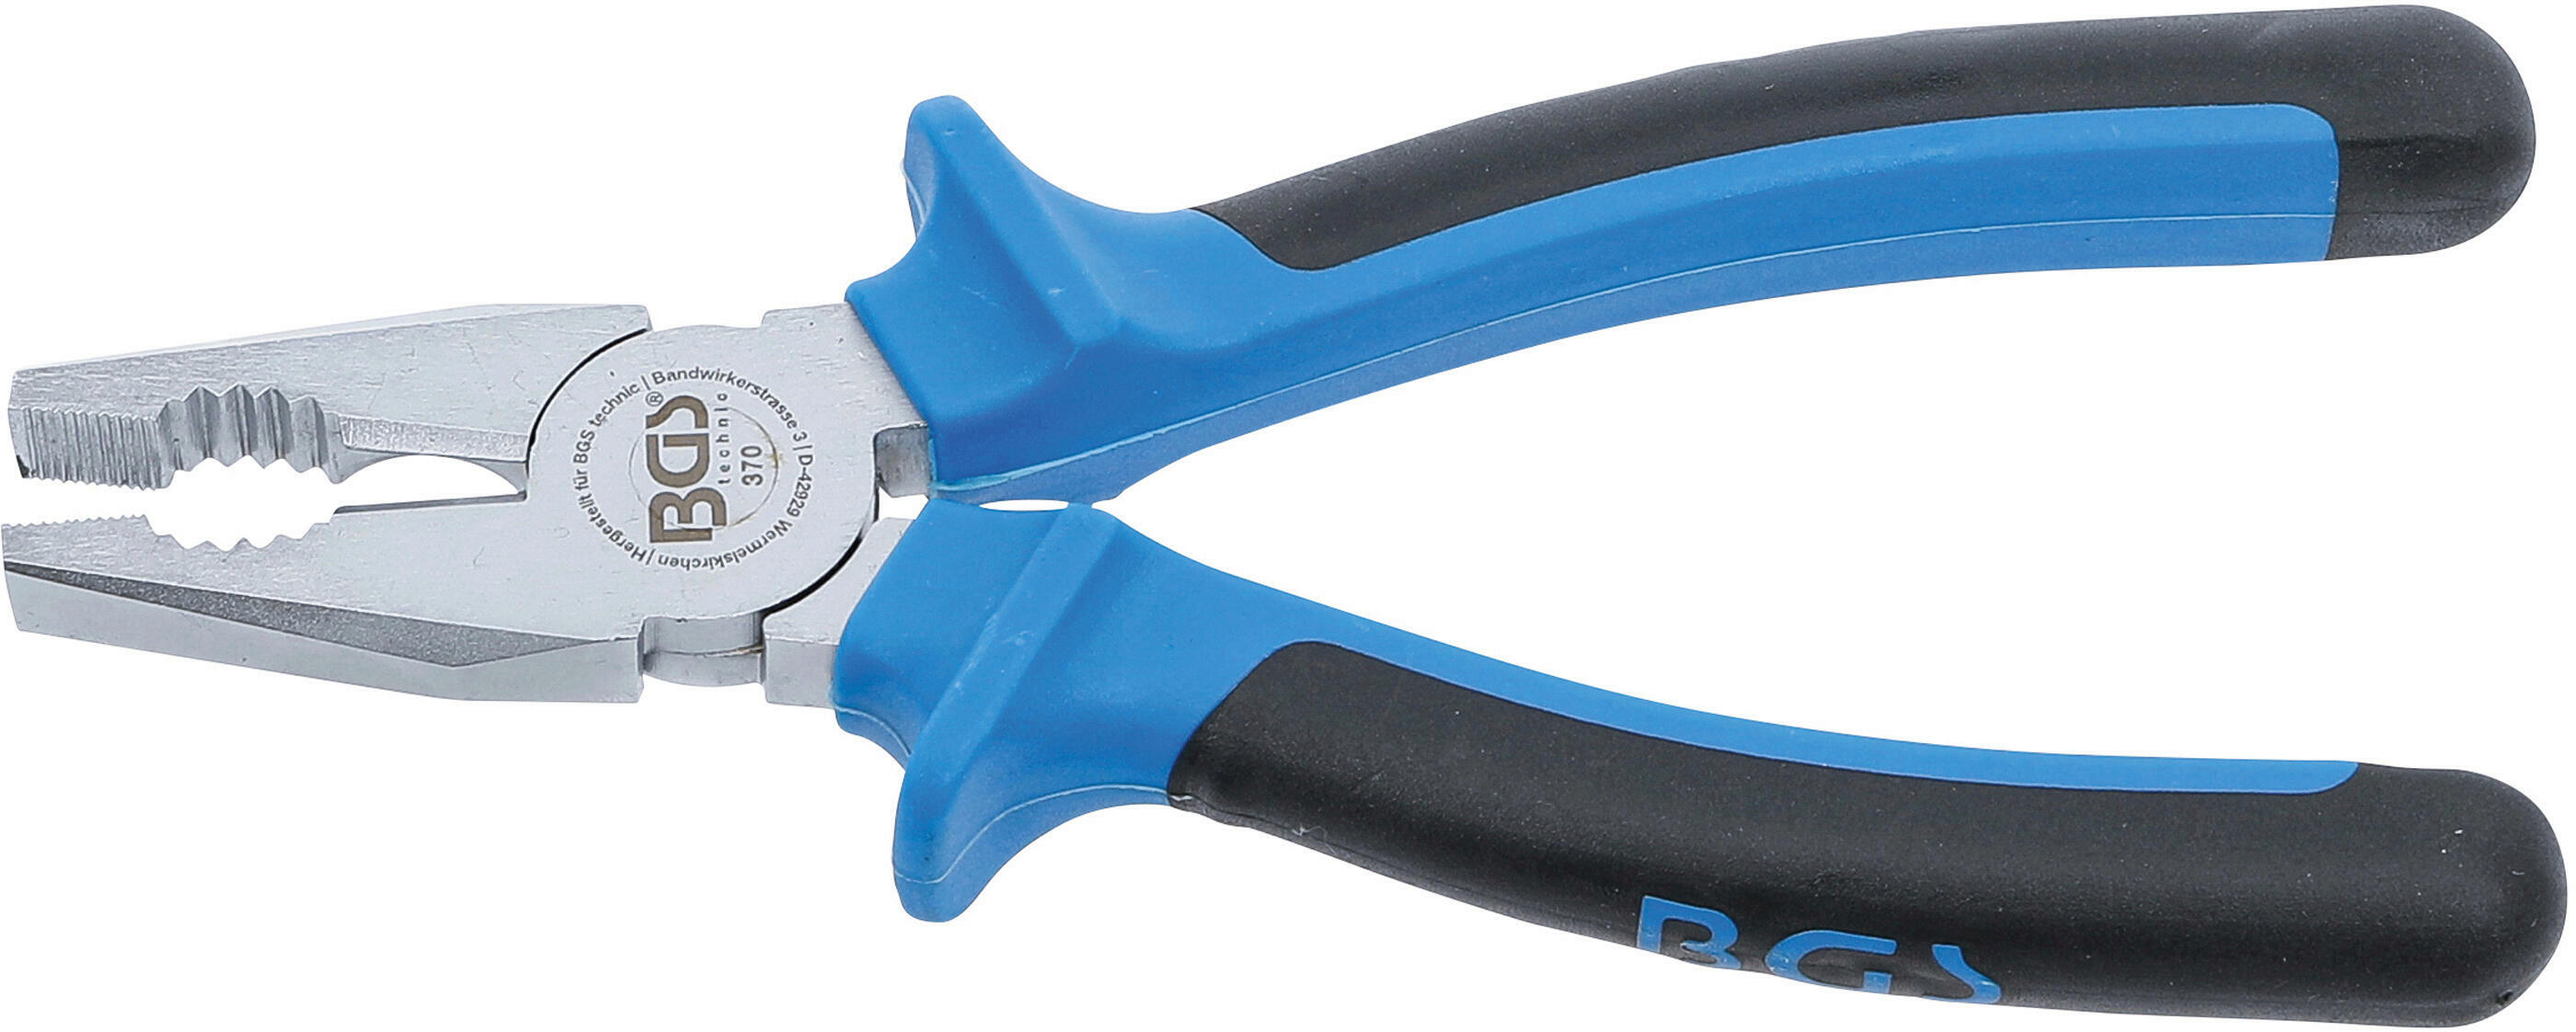 BGS Combination Pliers